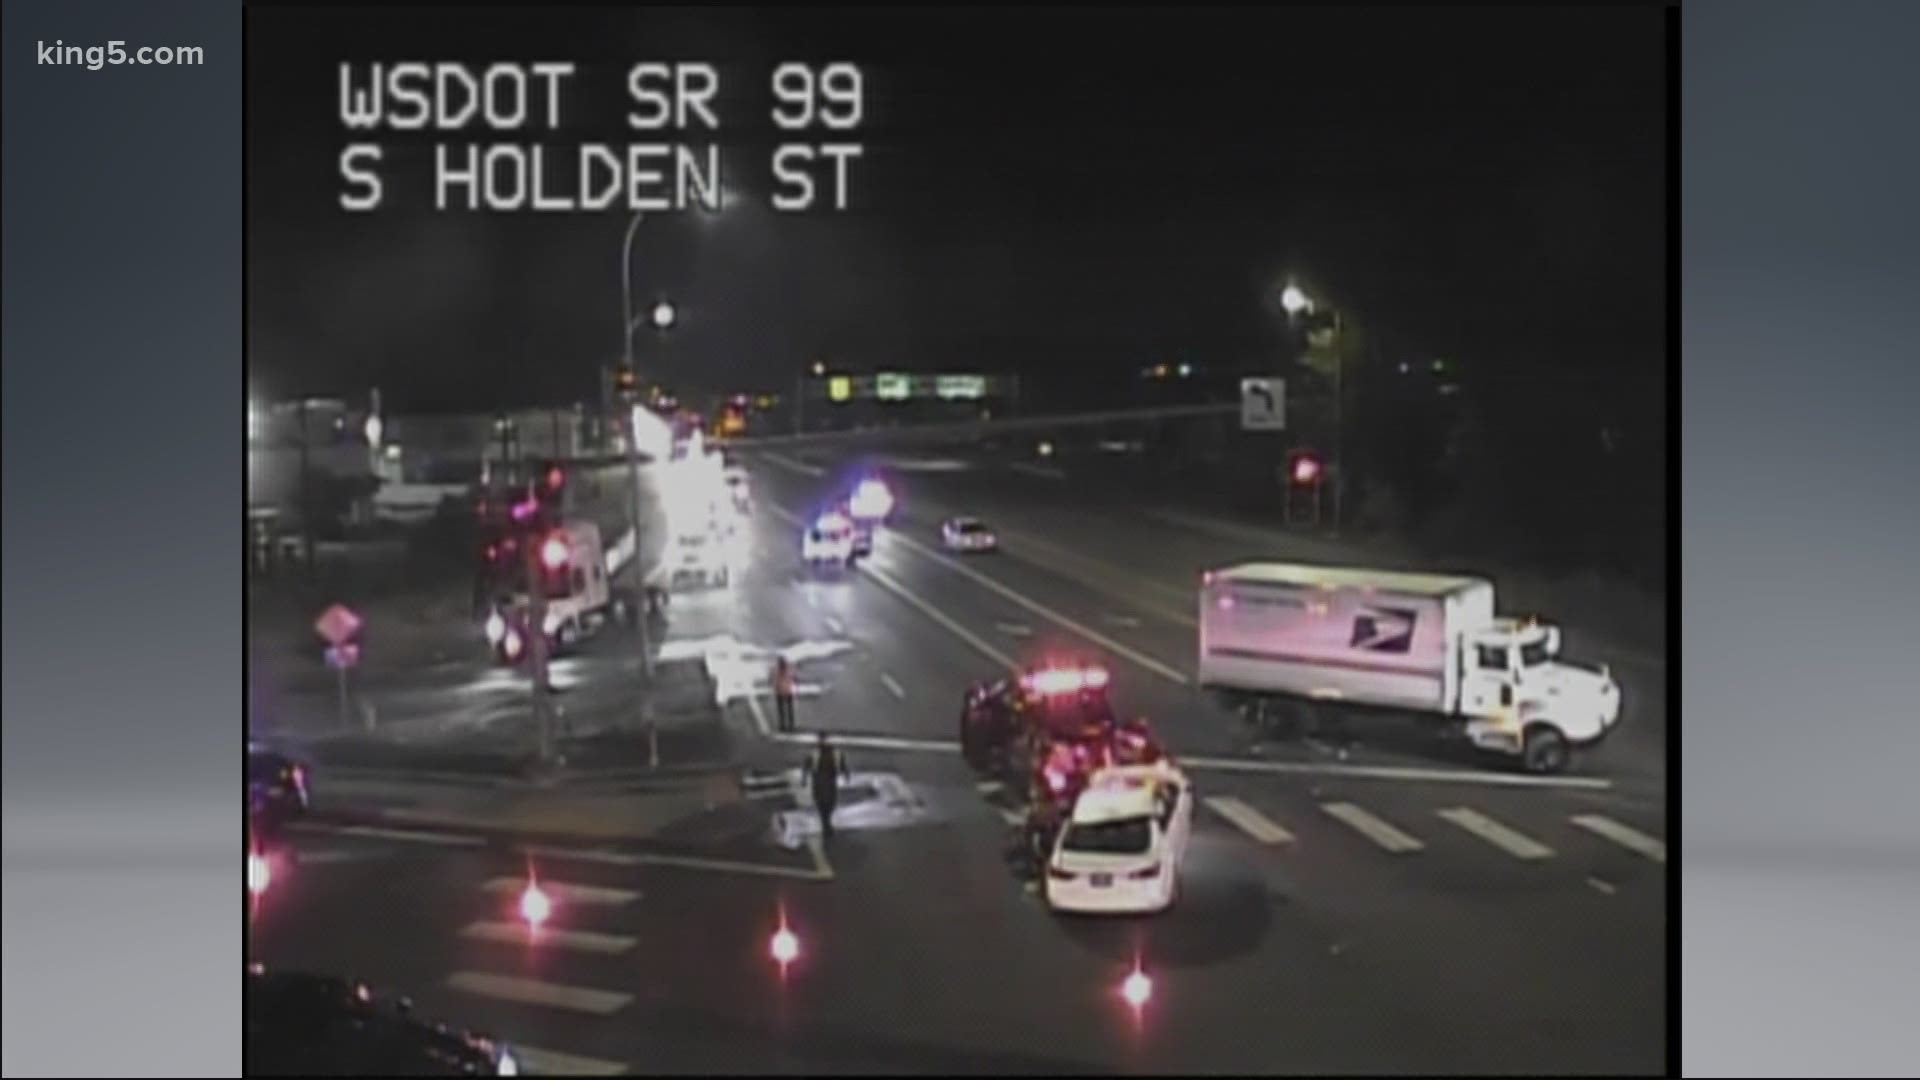 The Seattle Fire Department tweeted about the crash at S. Holden St. and W. Marginal Way around 4 a.m. Wednesday.